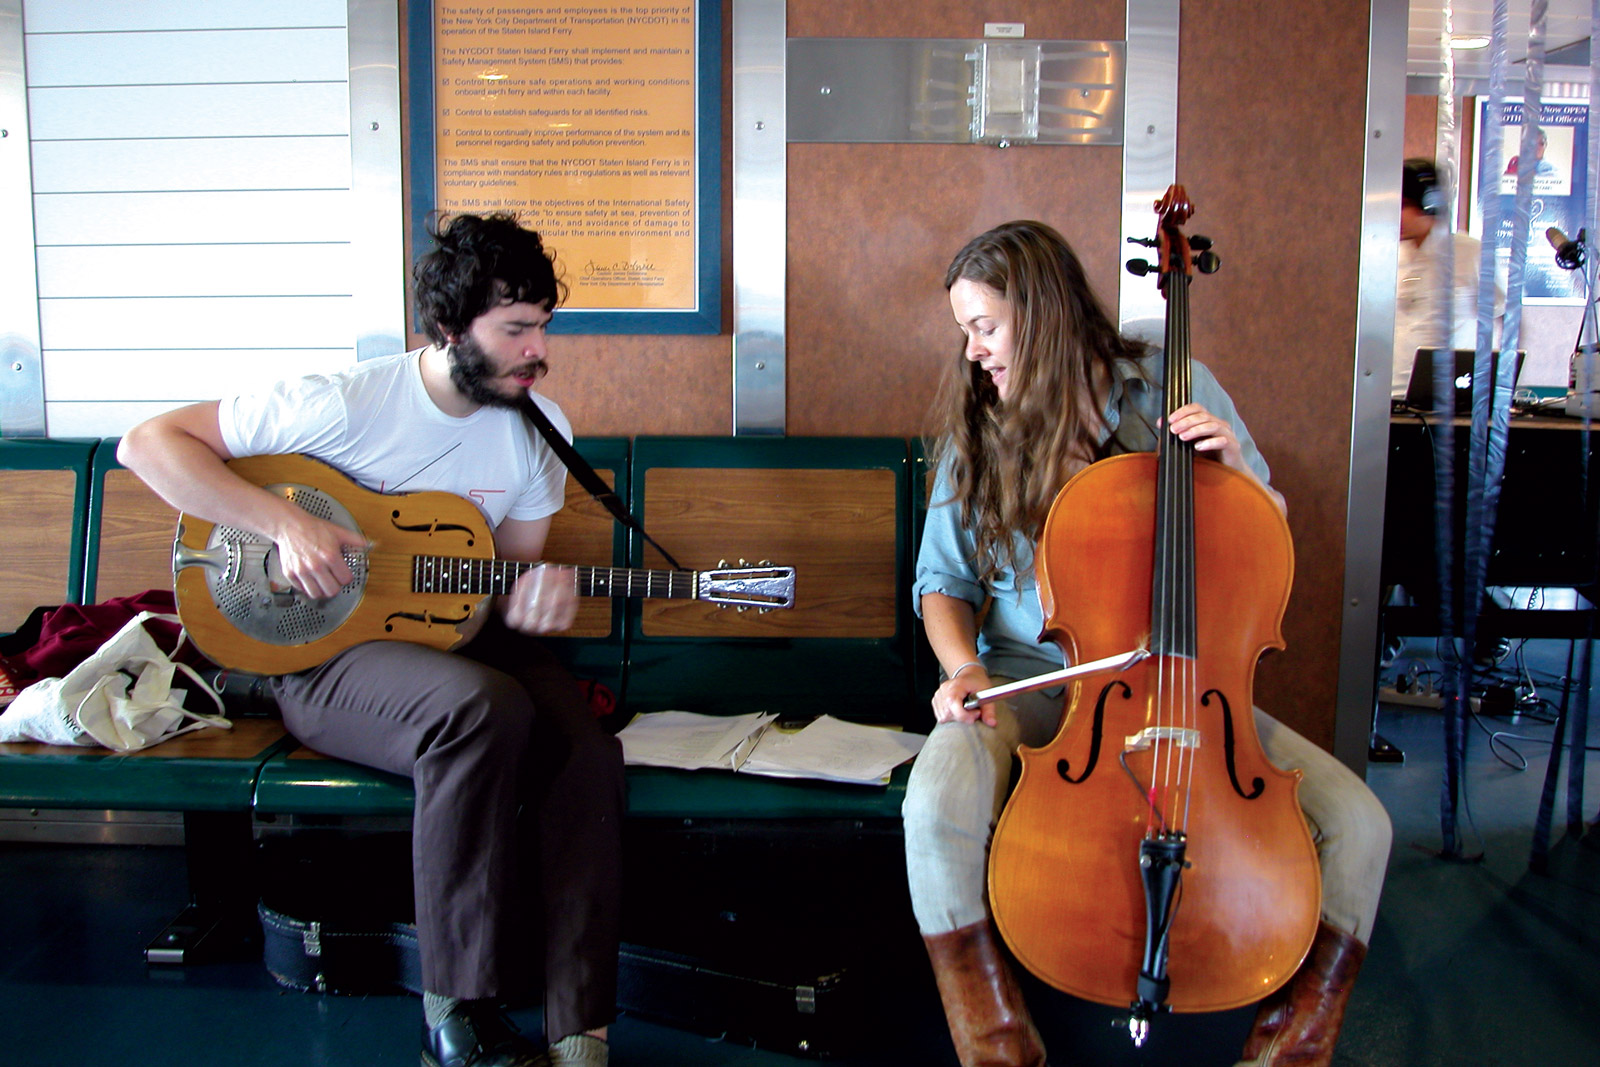 Tianna Kennedy and Zeke Healy perform a 24-minute marathon for passengers live on the Staten Island Ferry as it moves across Upper New York Bay.